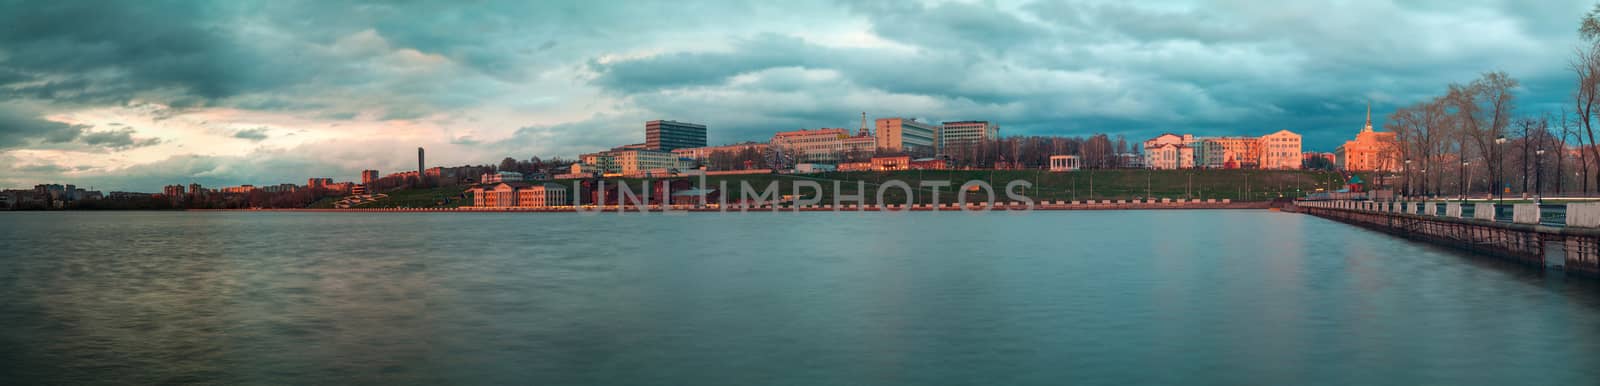 Pond panorama on the embankment in the city by sveter